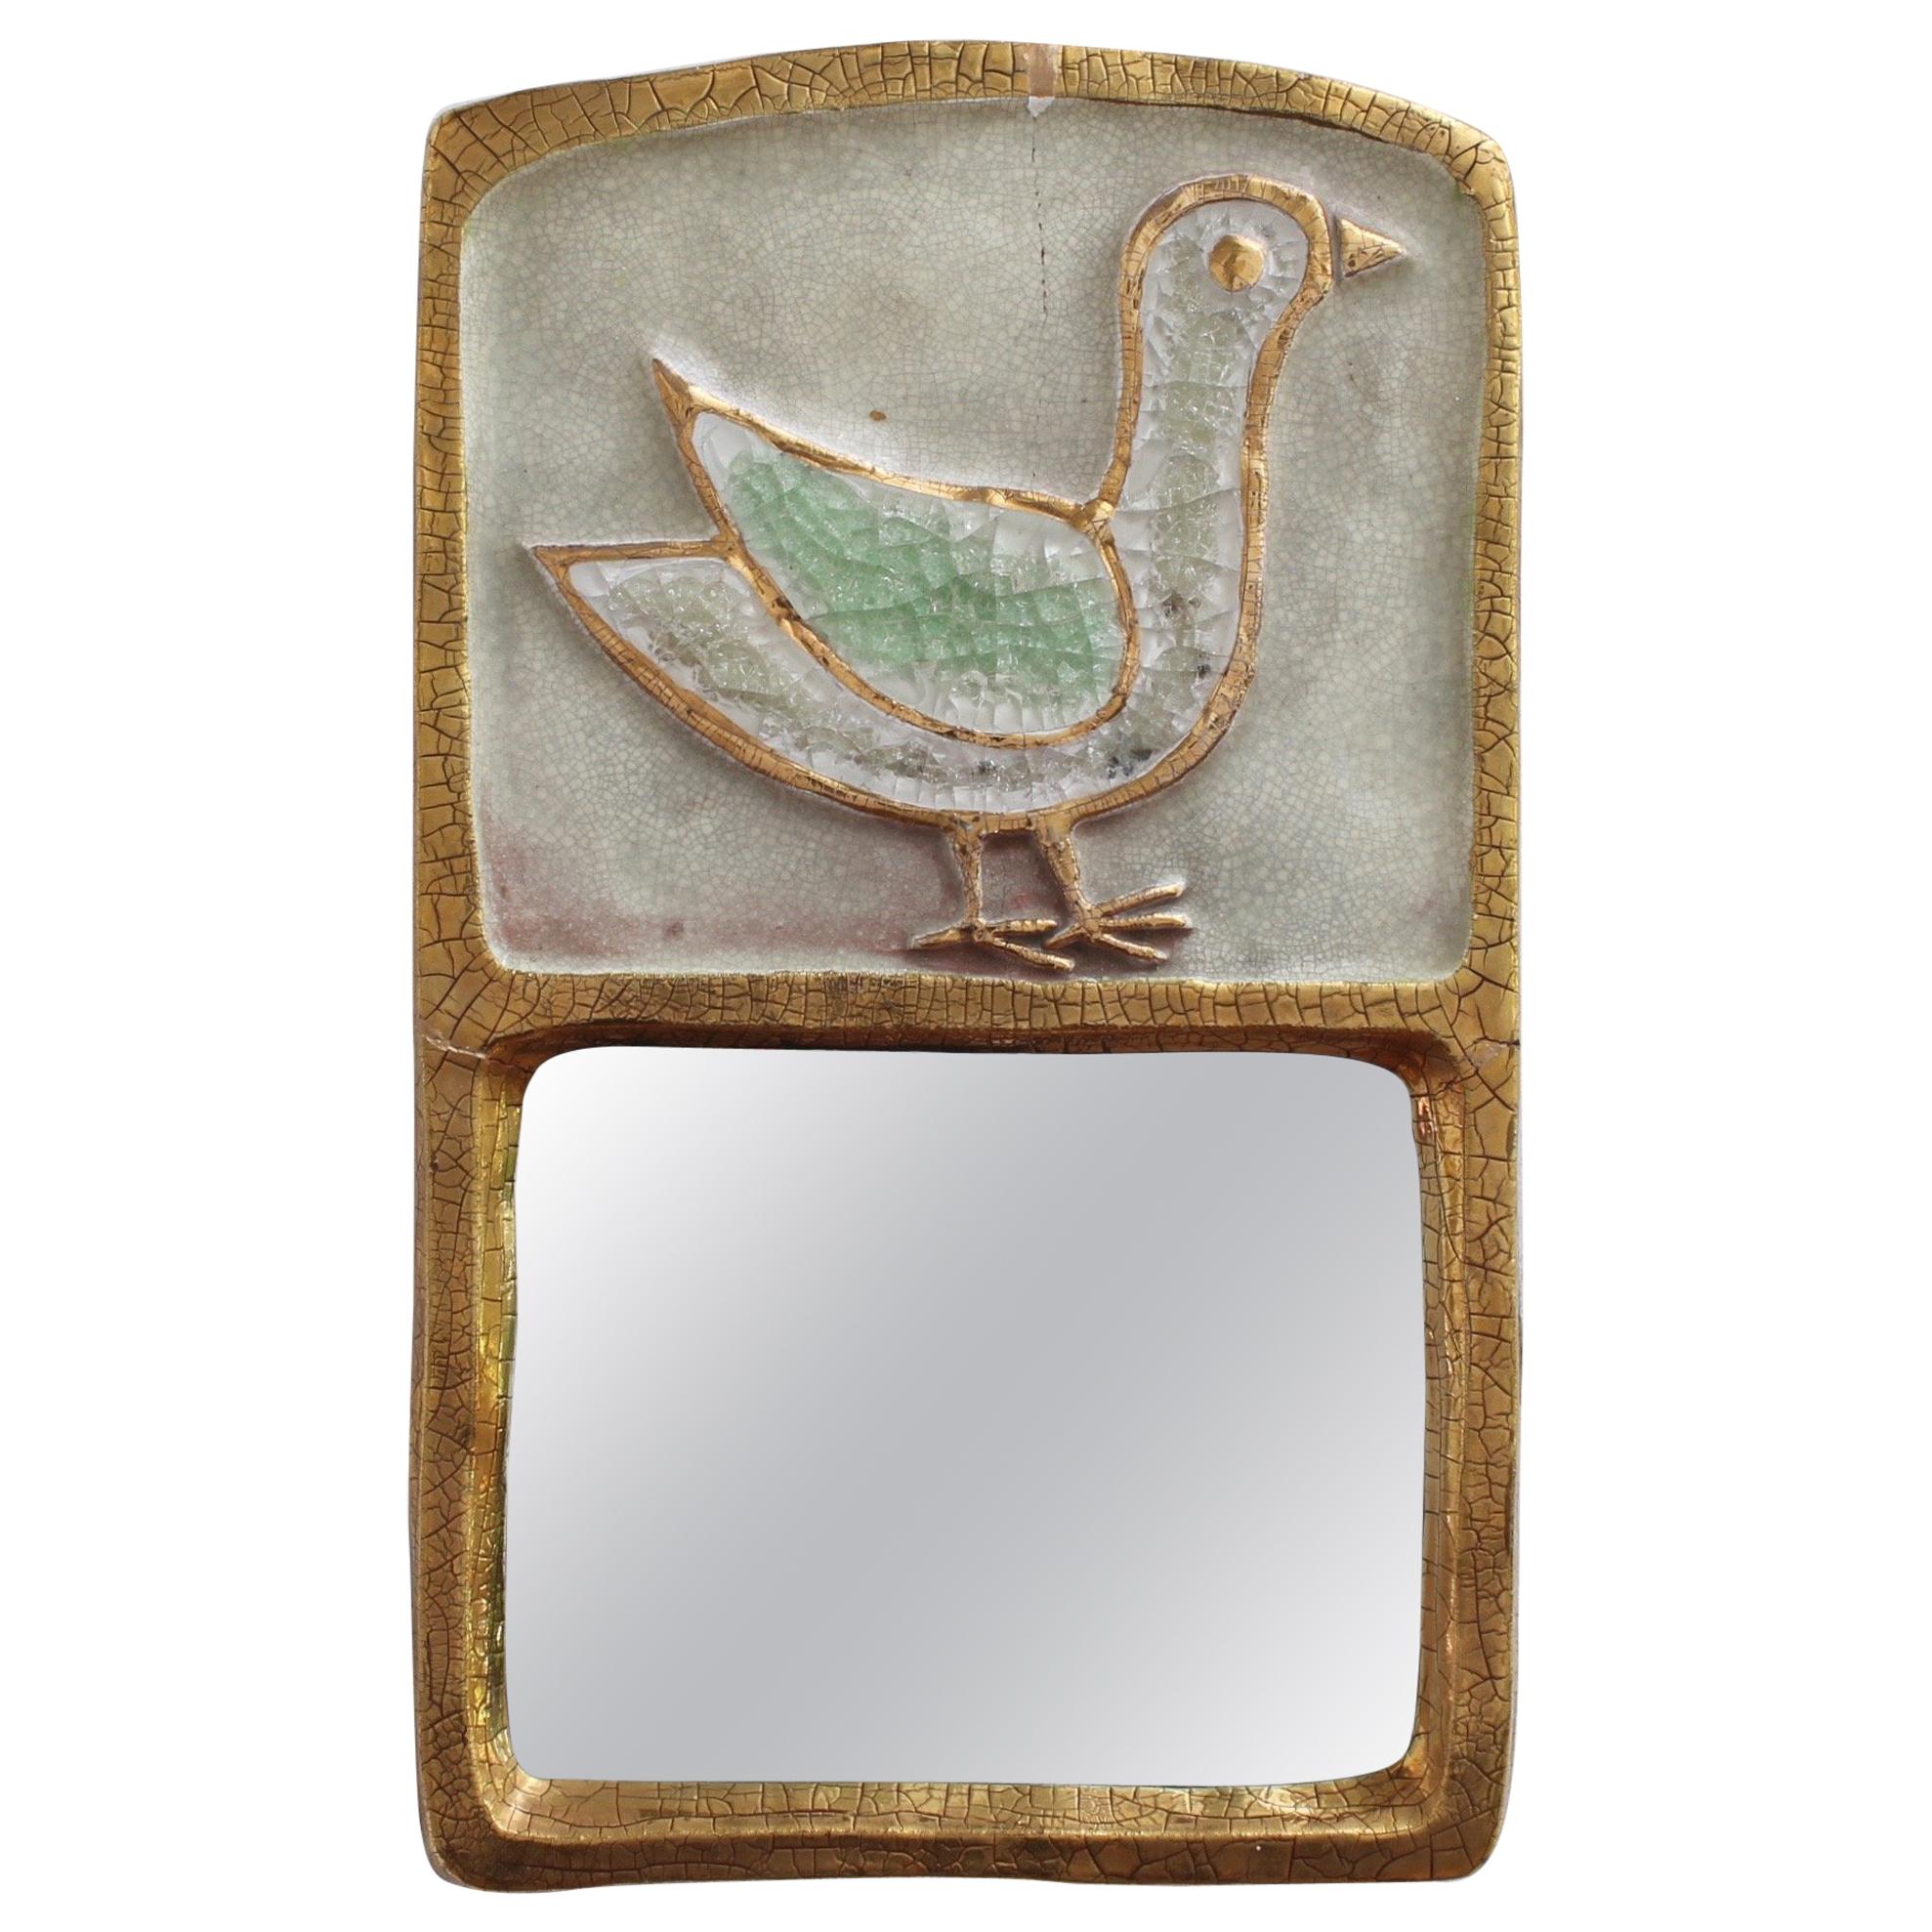 Ceramic Wall Mirror with Gold Crackle Glaze and Stylised Bird by François Lembo